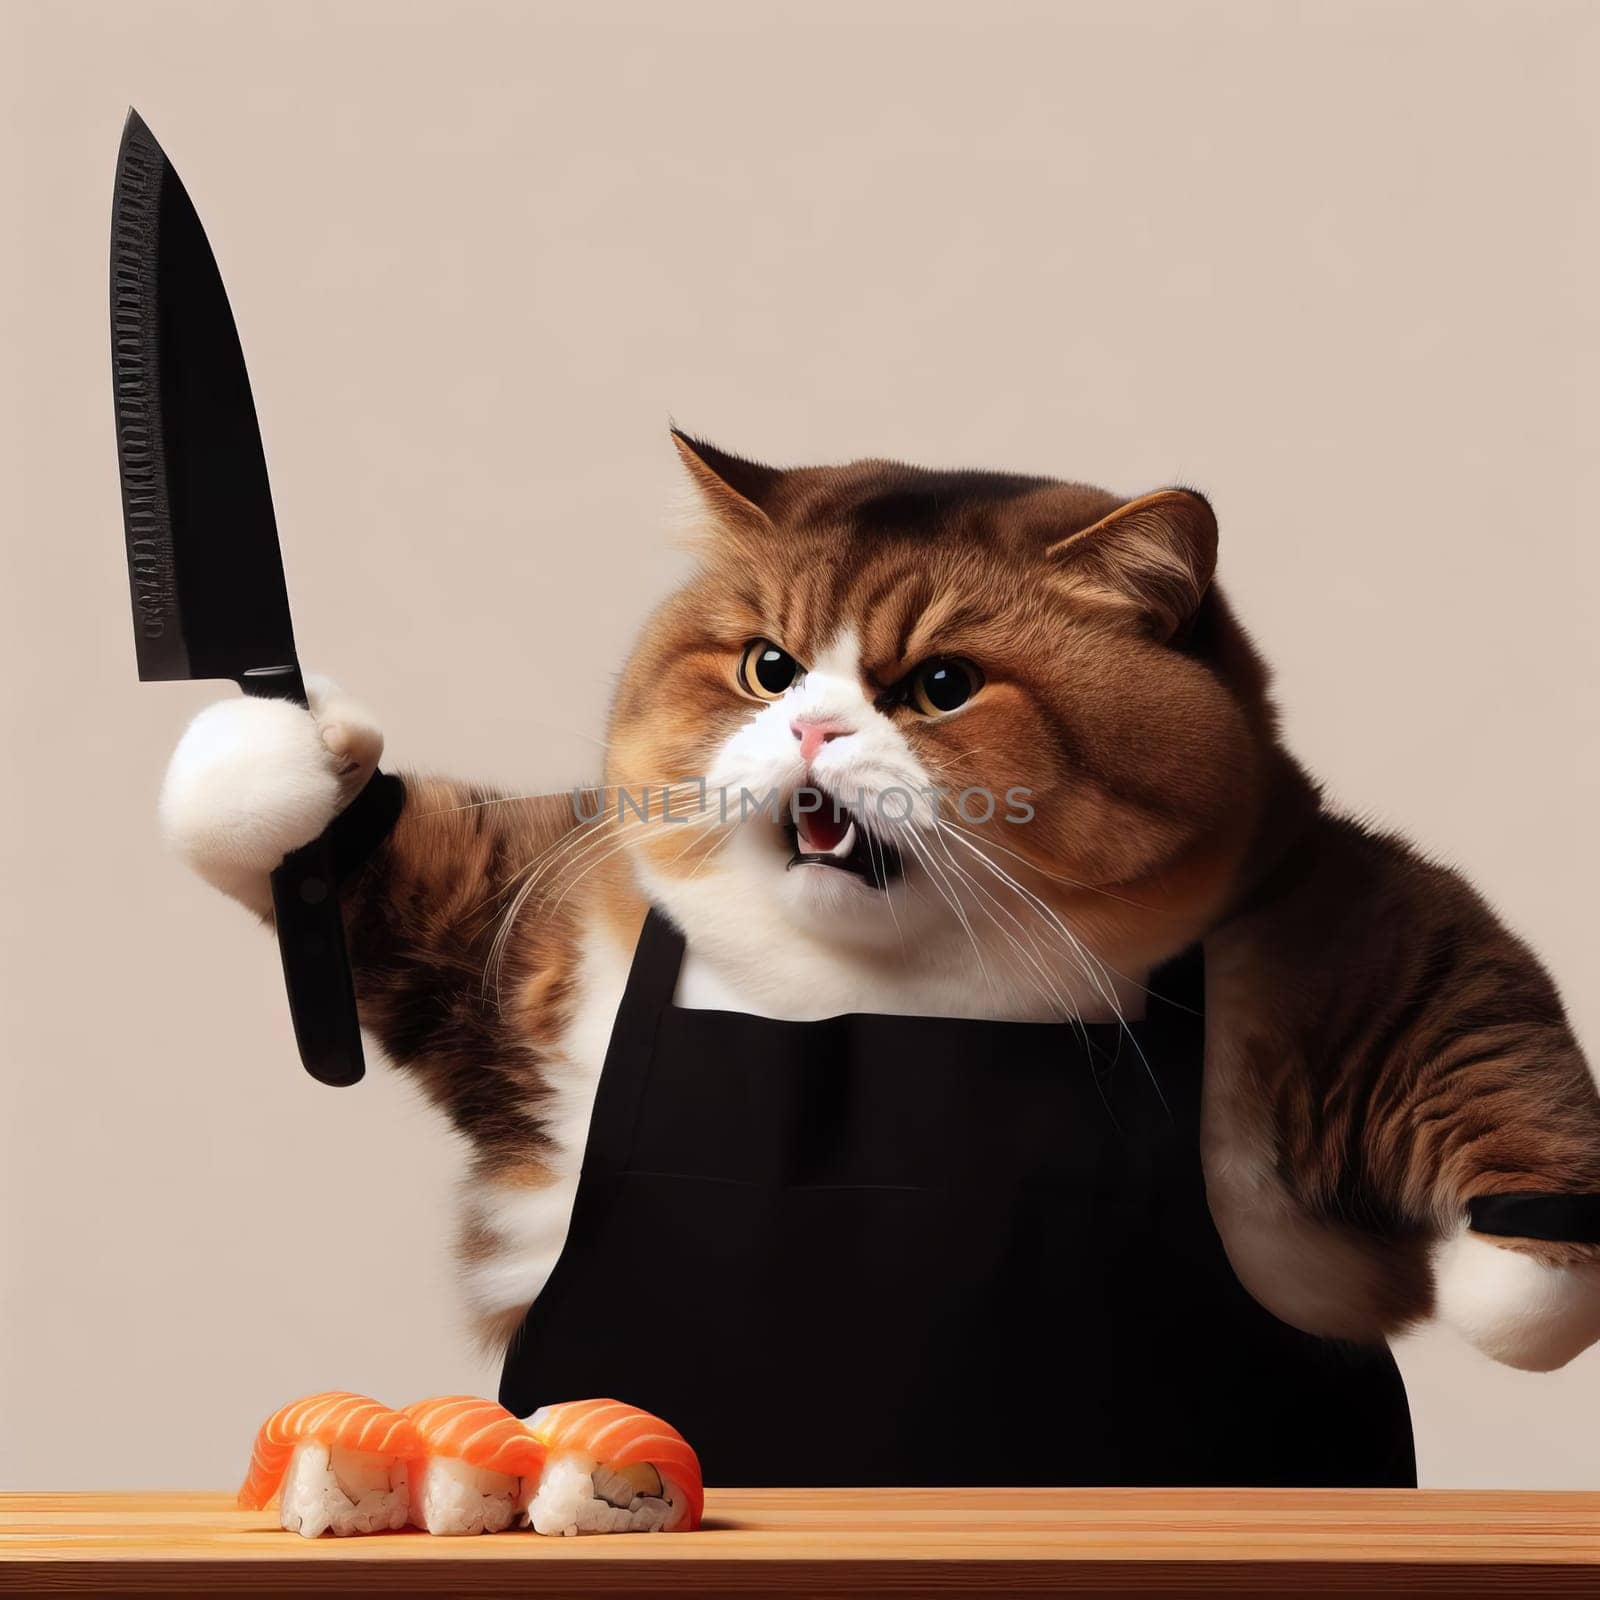 A fat cat in an apron with a knife in his paws prepares sushi on a uniform gray background. High quality photo